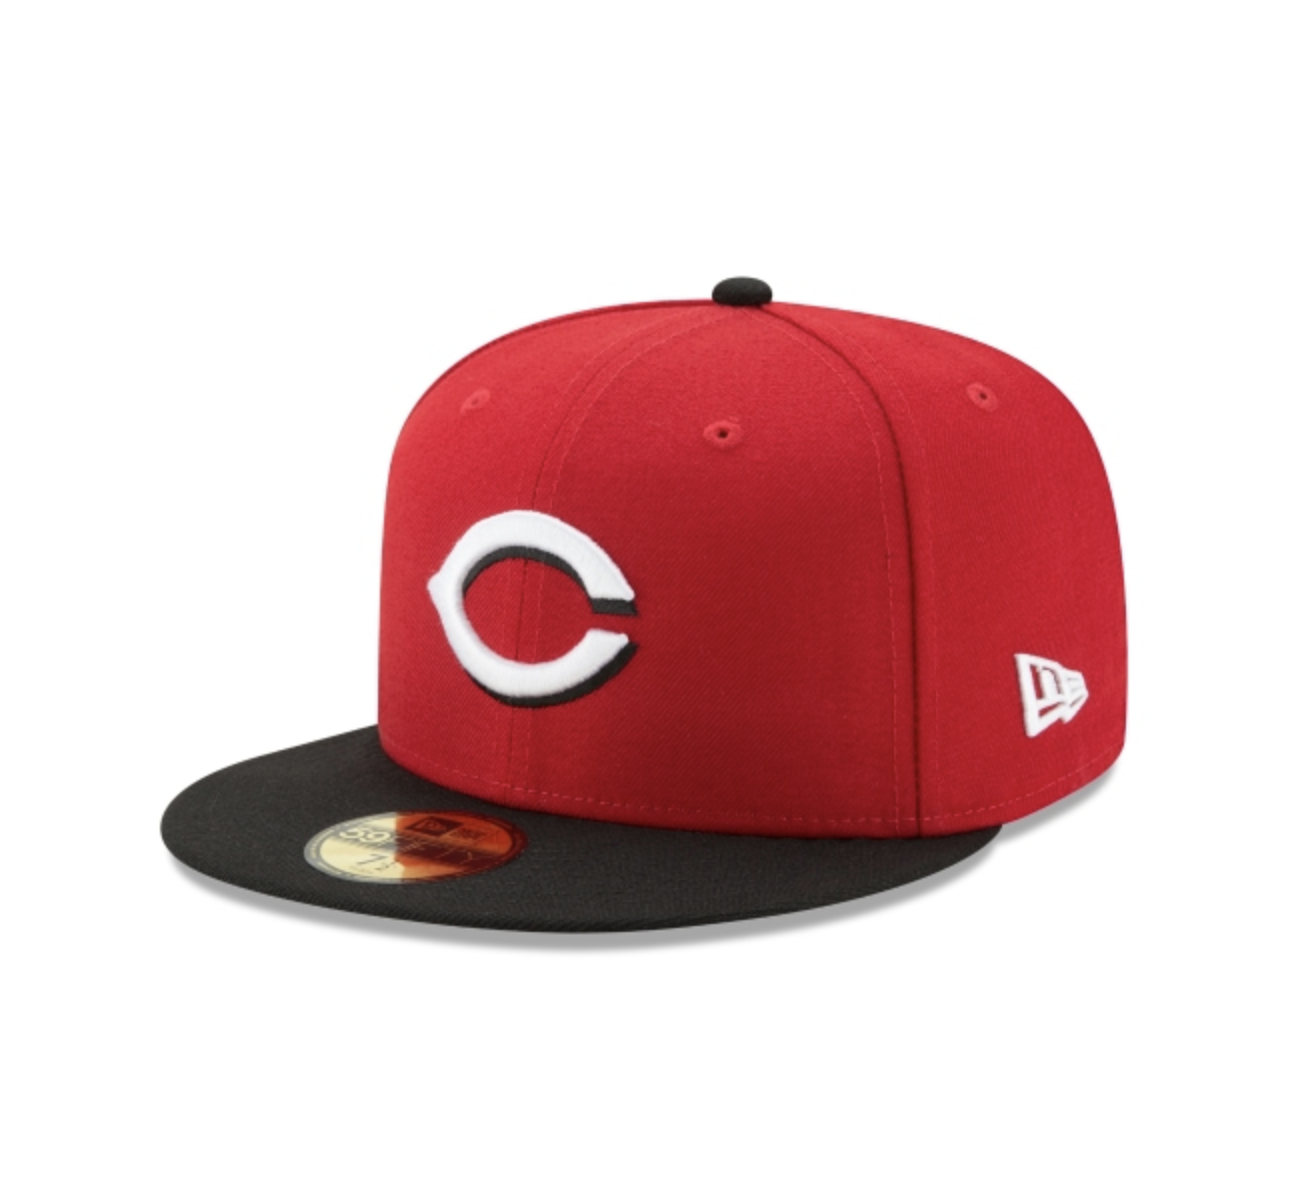 Cincinnati Reds New Era Alternate Authentic Collection On-Field 59FIFTY  Fitted Hat - Black/Red